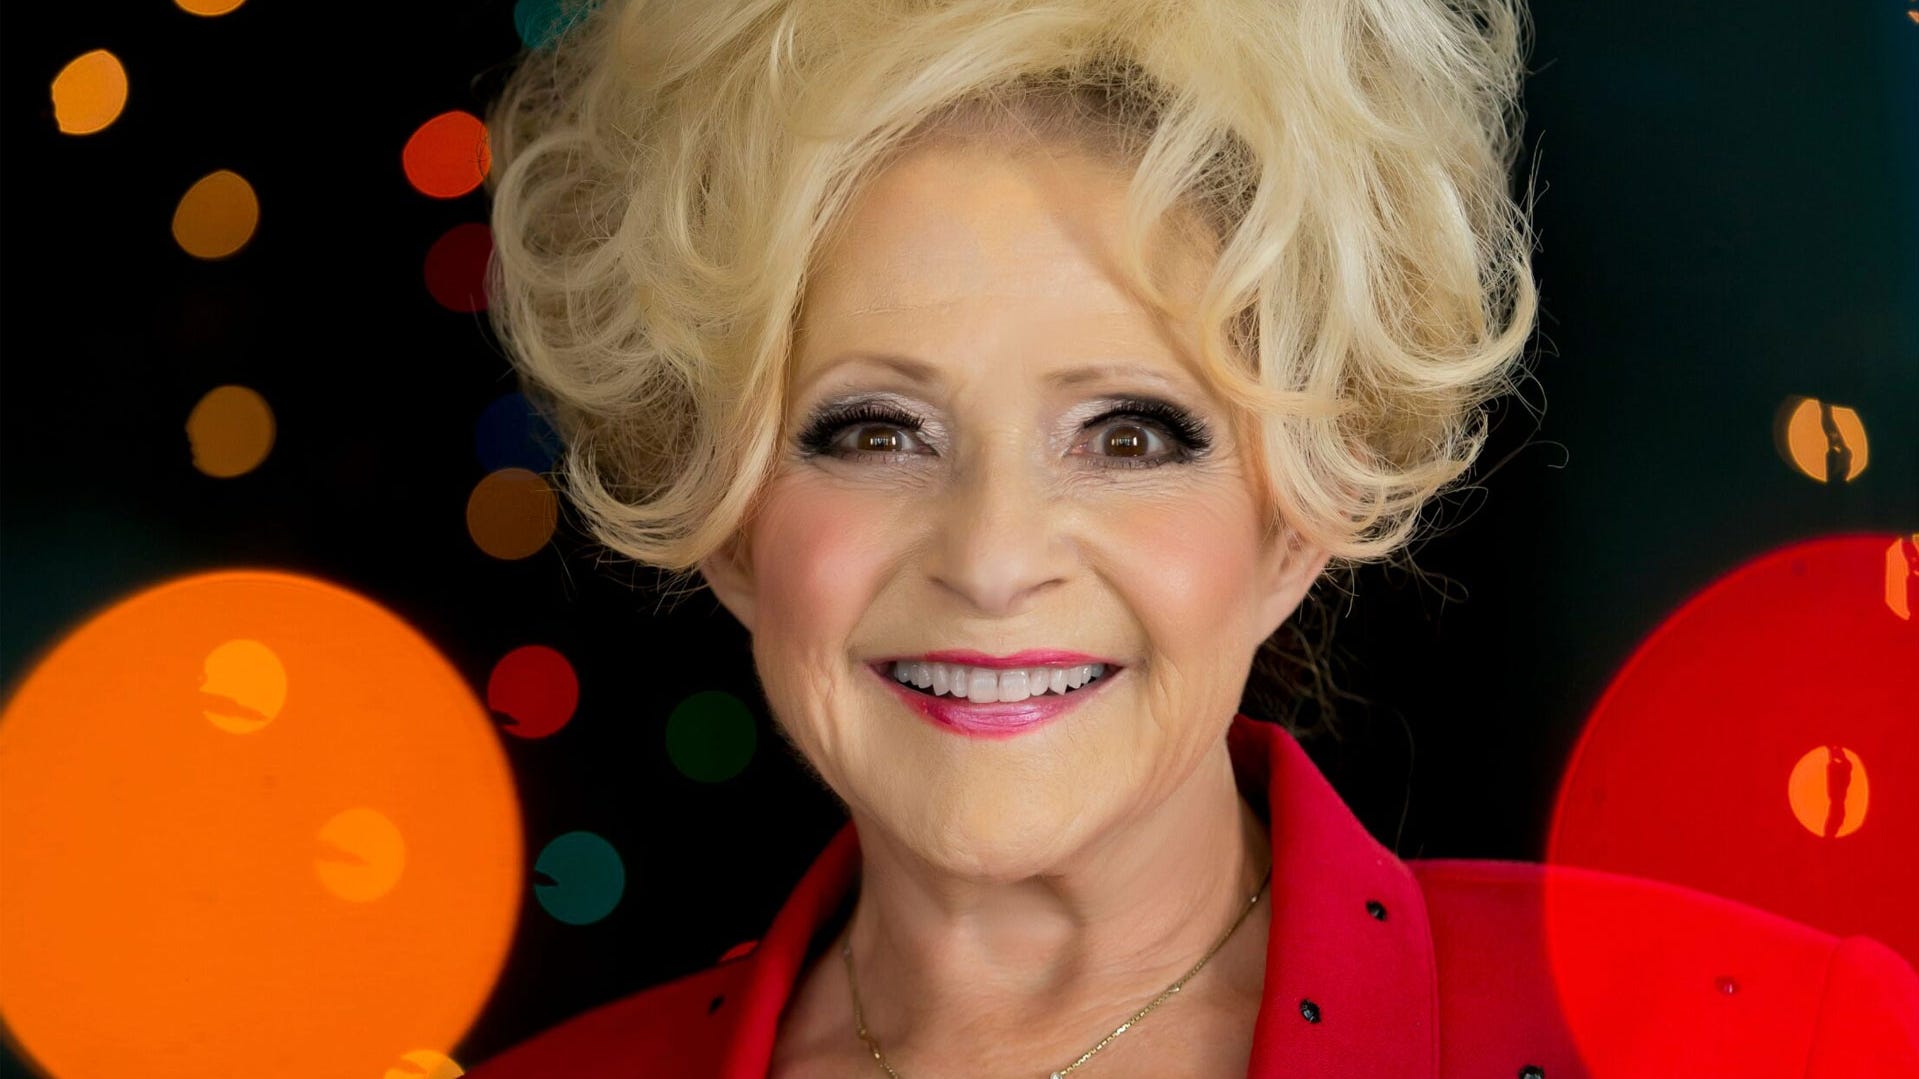 Is this the year Brenda Lee's holiday hit goes to No. 1? It should be